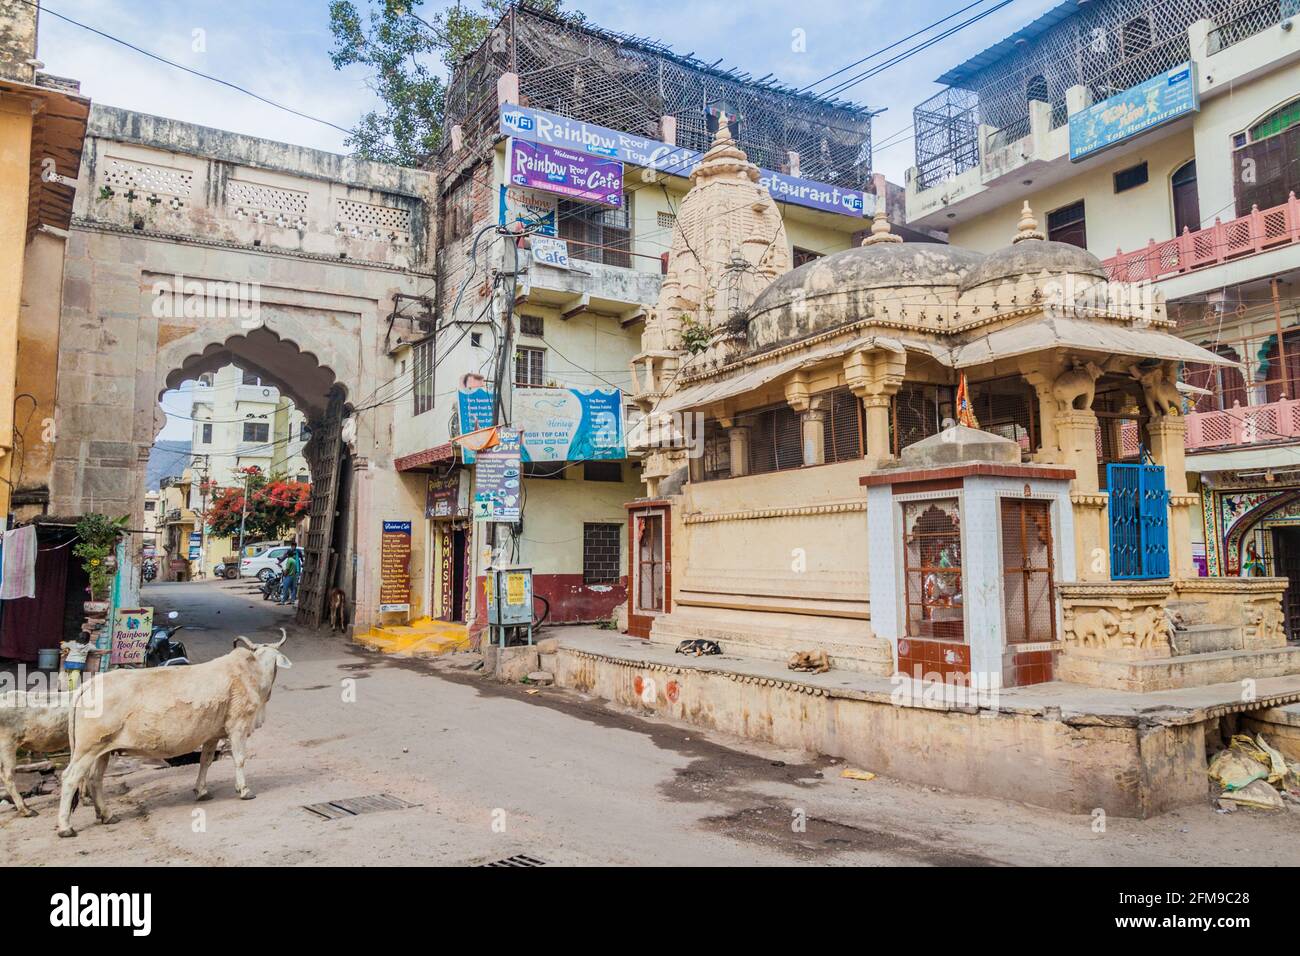 BUNDI, INDIA - FEBRUARY 16, 2017: Gate and a small temple in the center of Bundi, Rajasthan state, India Stock Photo